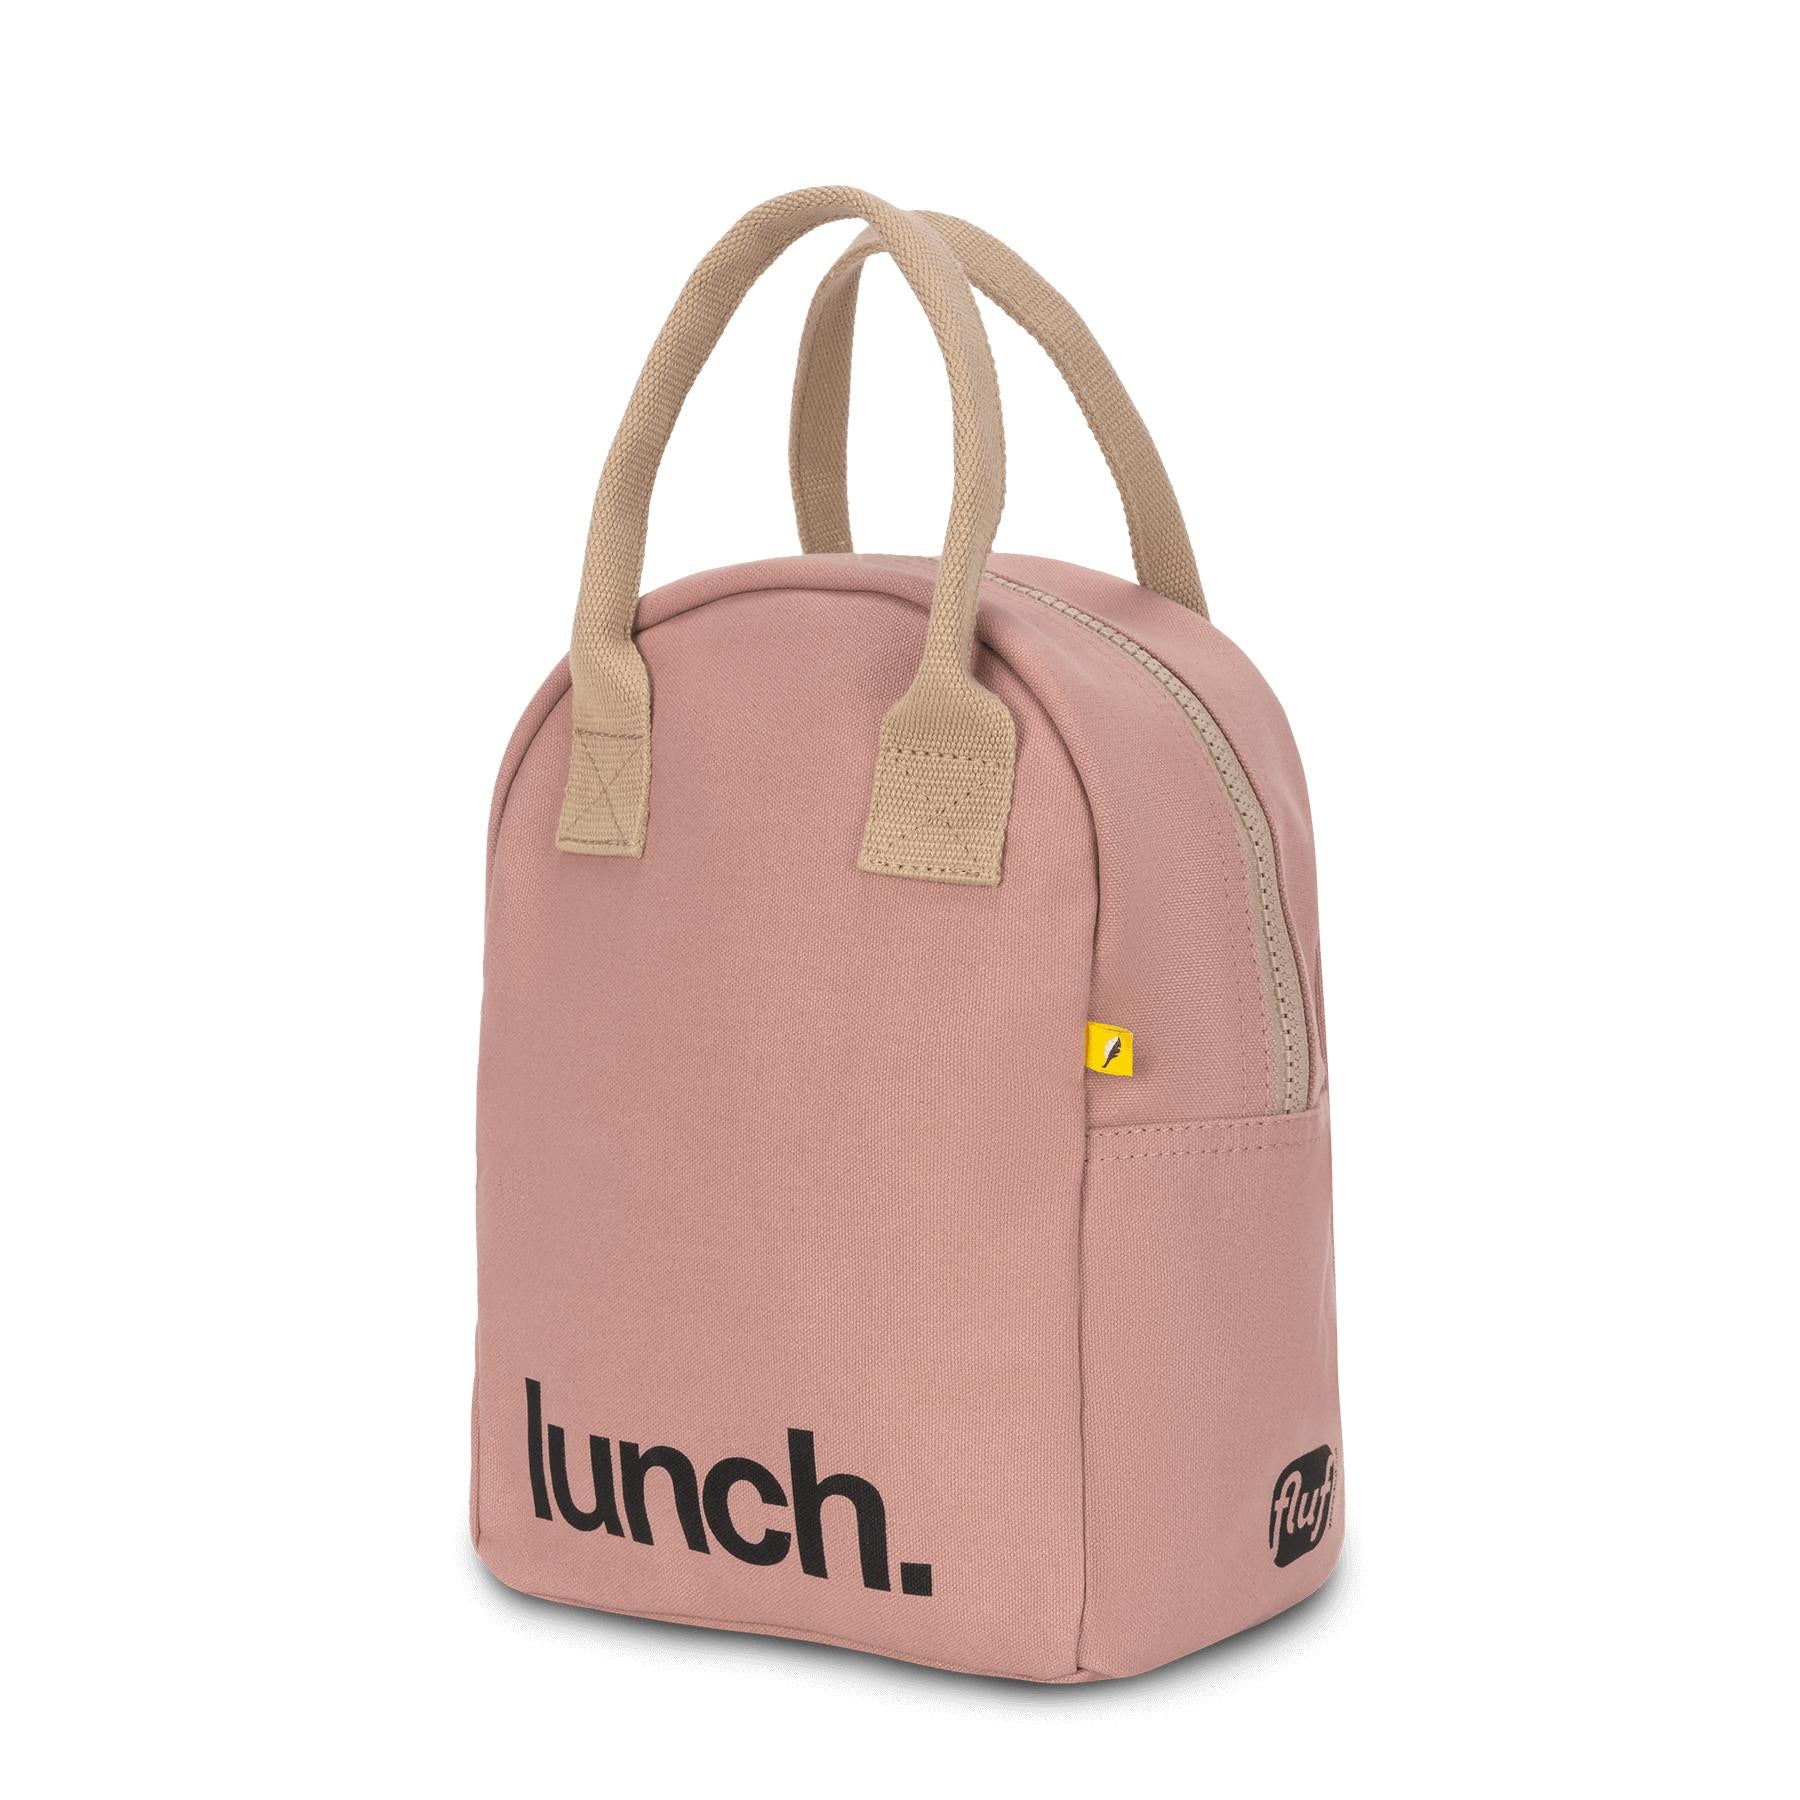 Zipper Lunch - 'Lunch' Vintage Rose